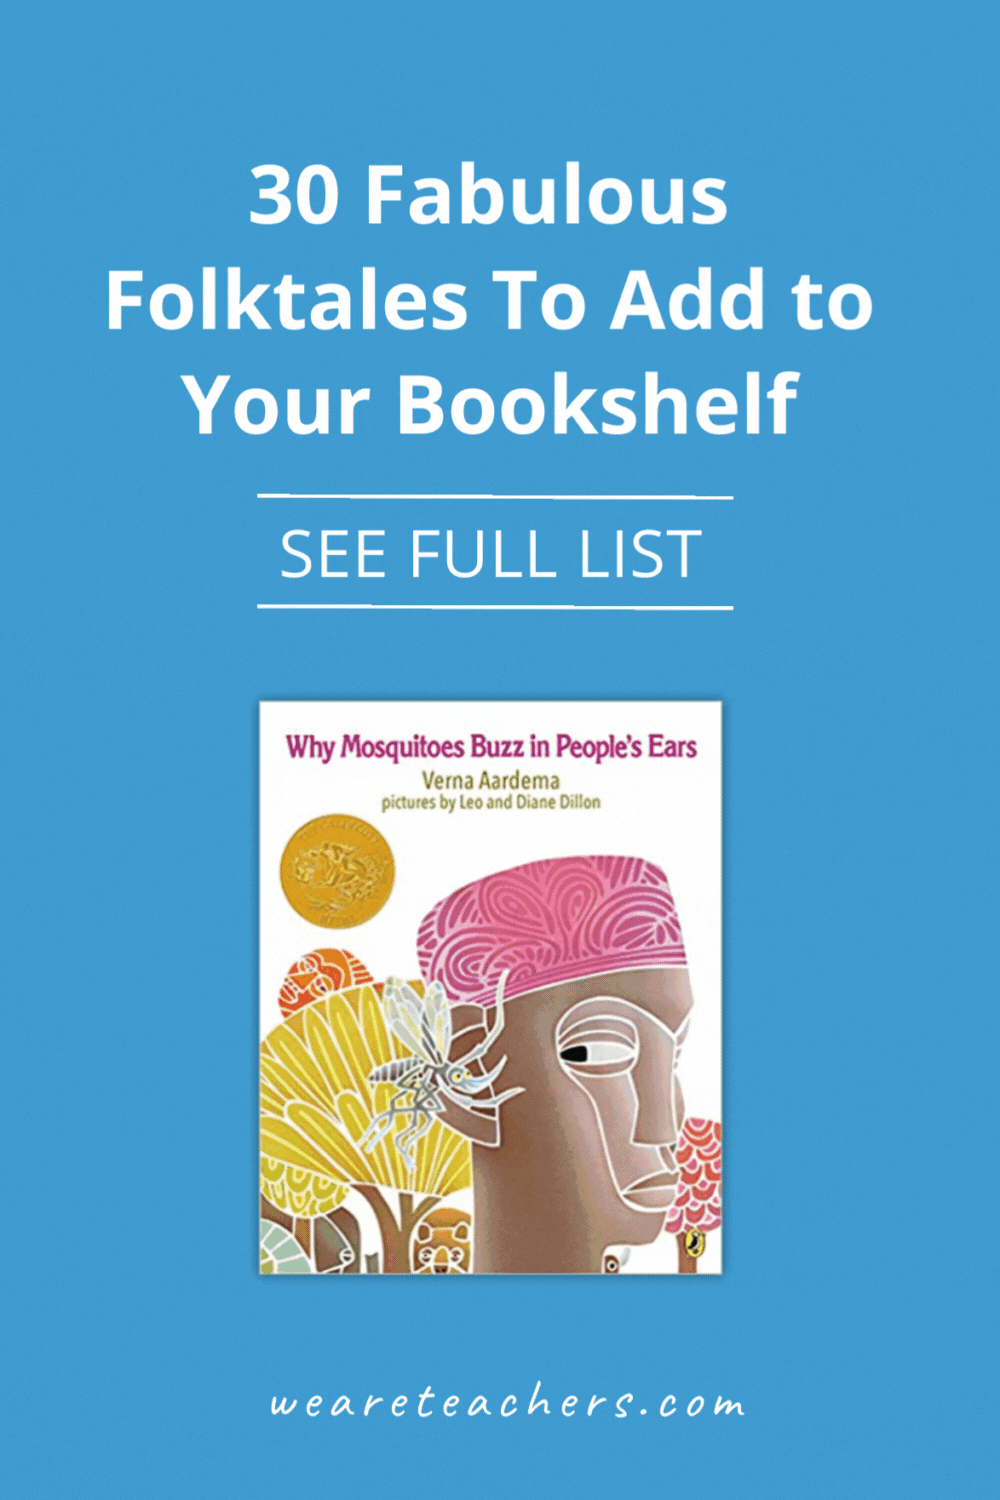 Check out this list of captivating folktales for kids to enrich your classroom library and engage students.